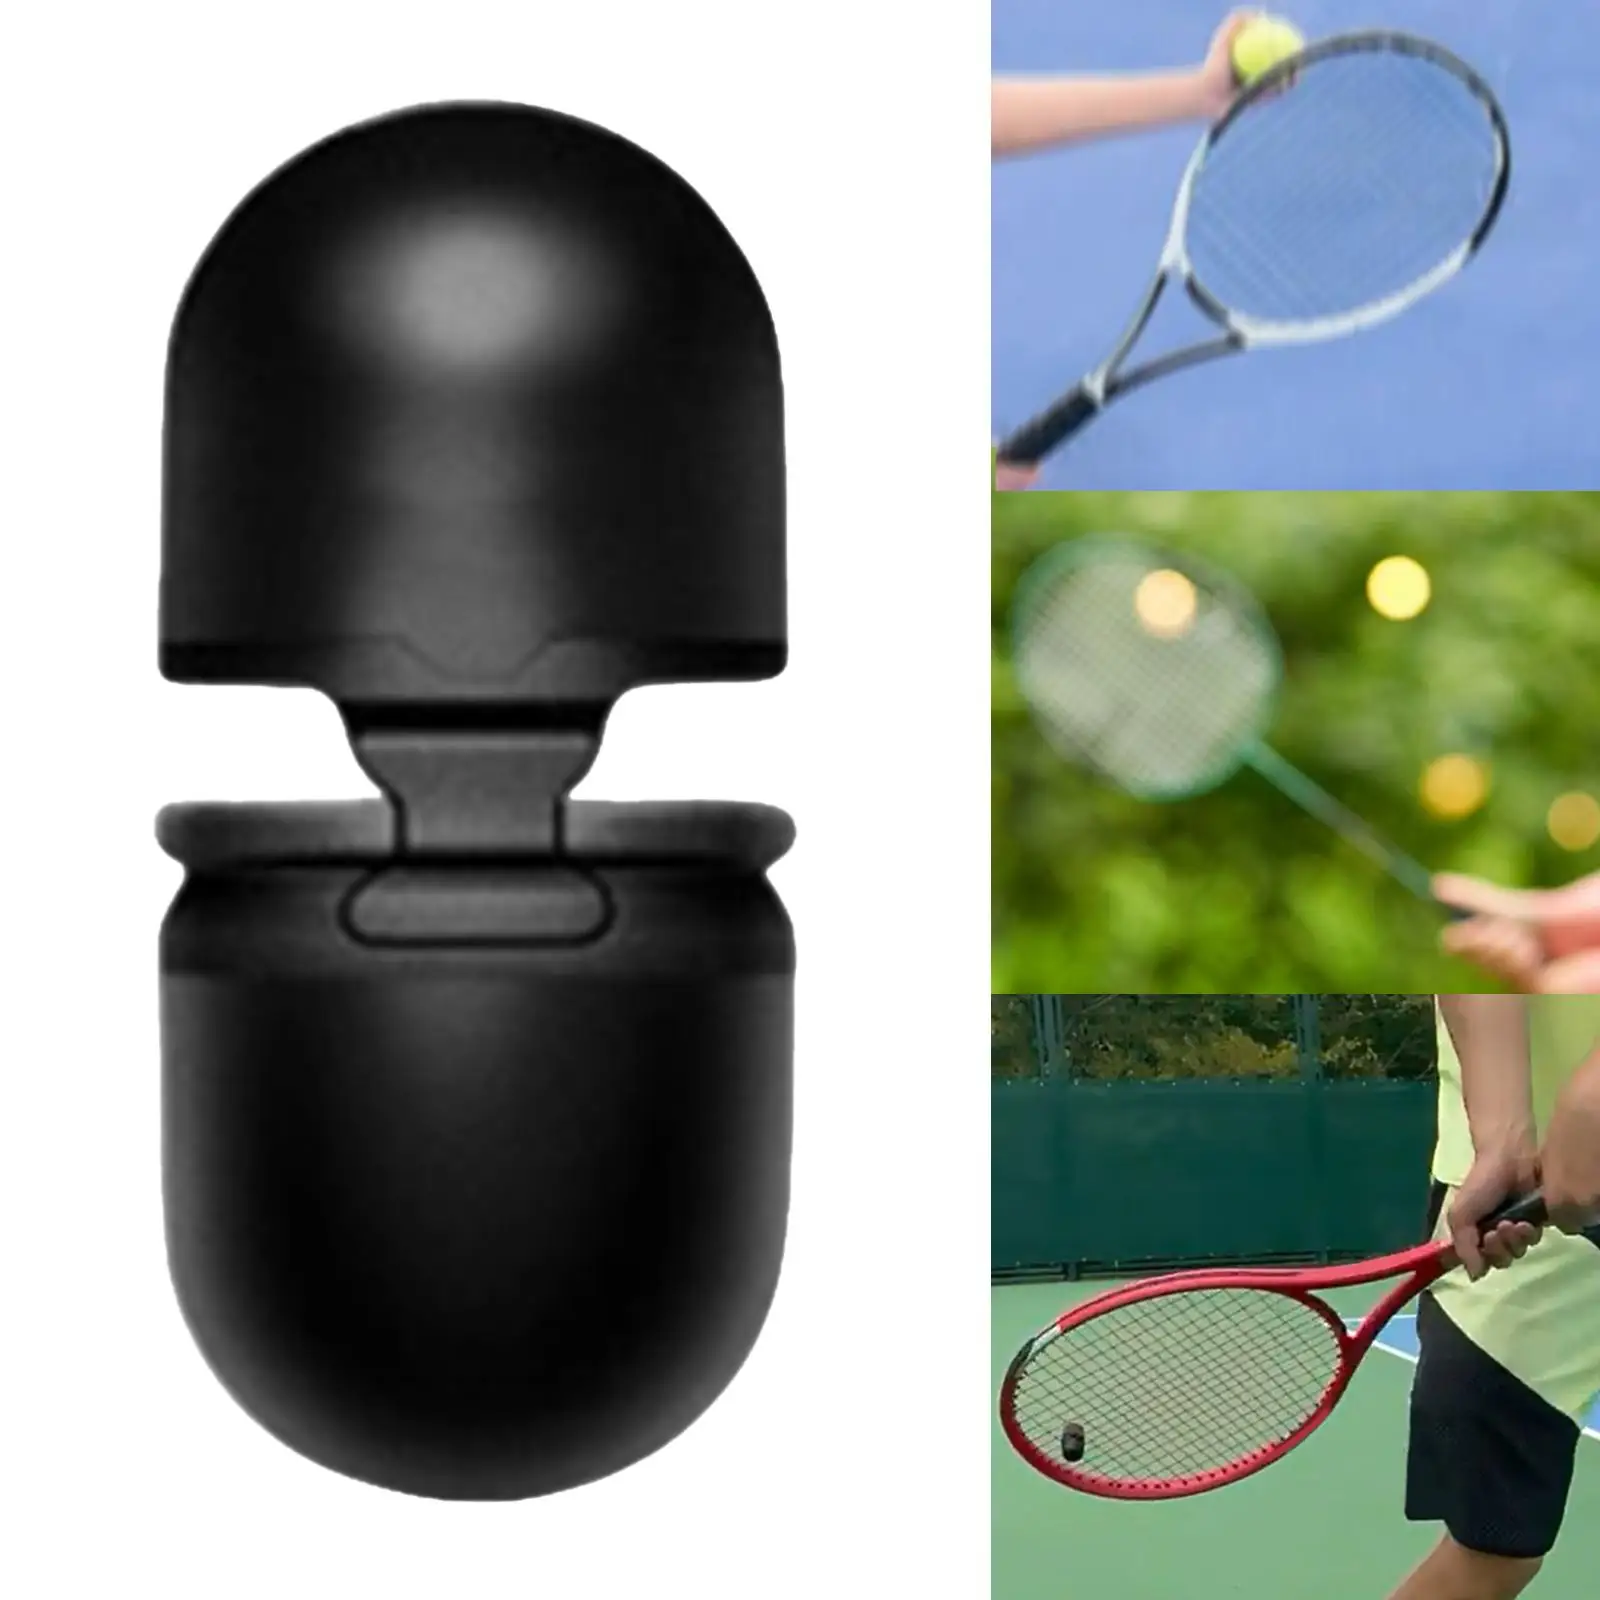 Tennis Topspin Whistle Portable Accessories Sports training aid Training Tool